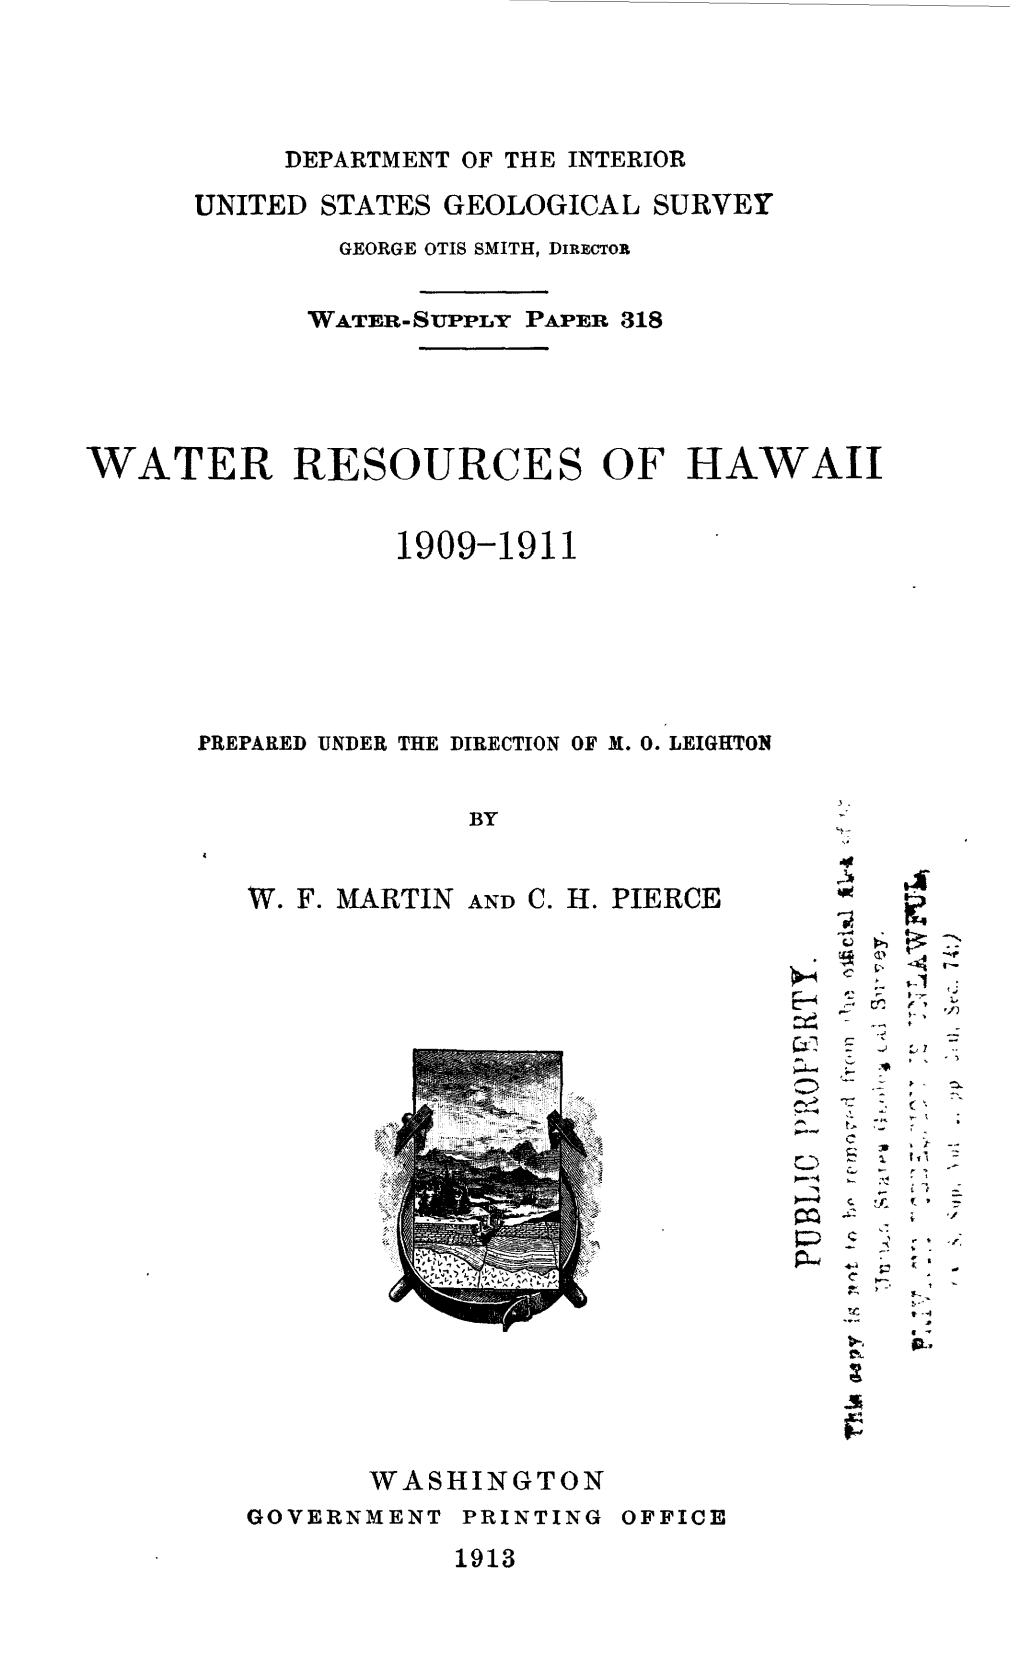 Water Resources of Hawaii 1909-1911